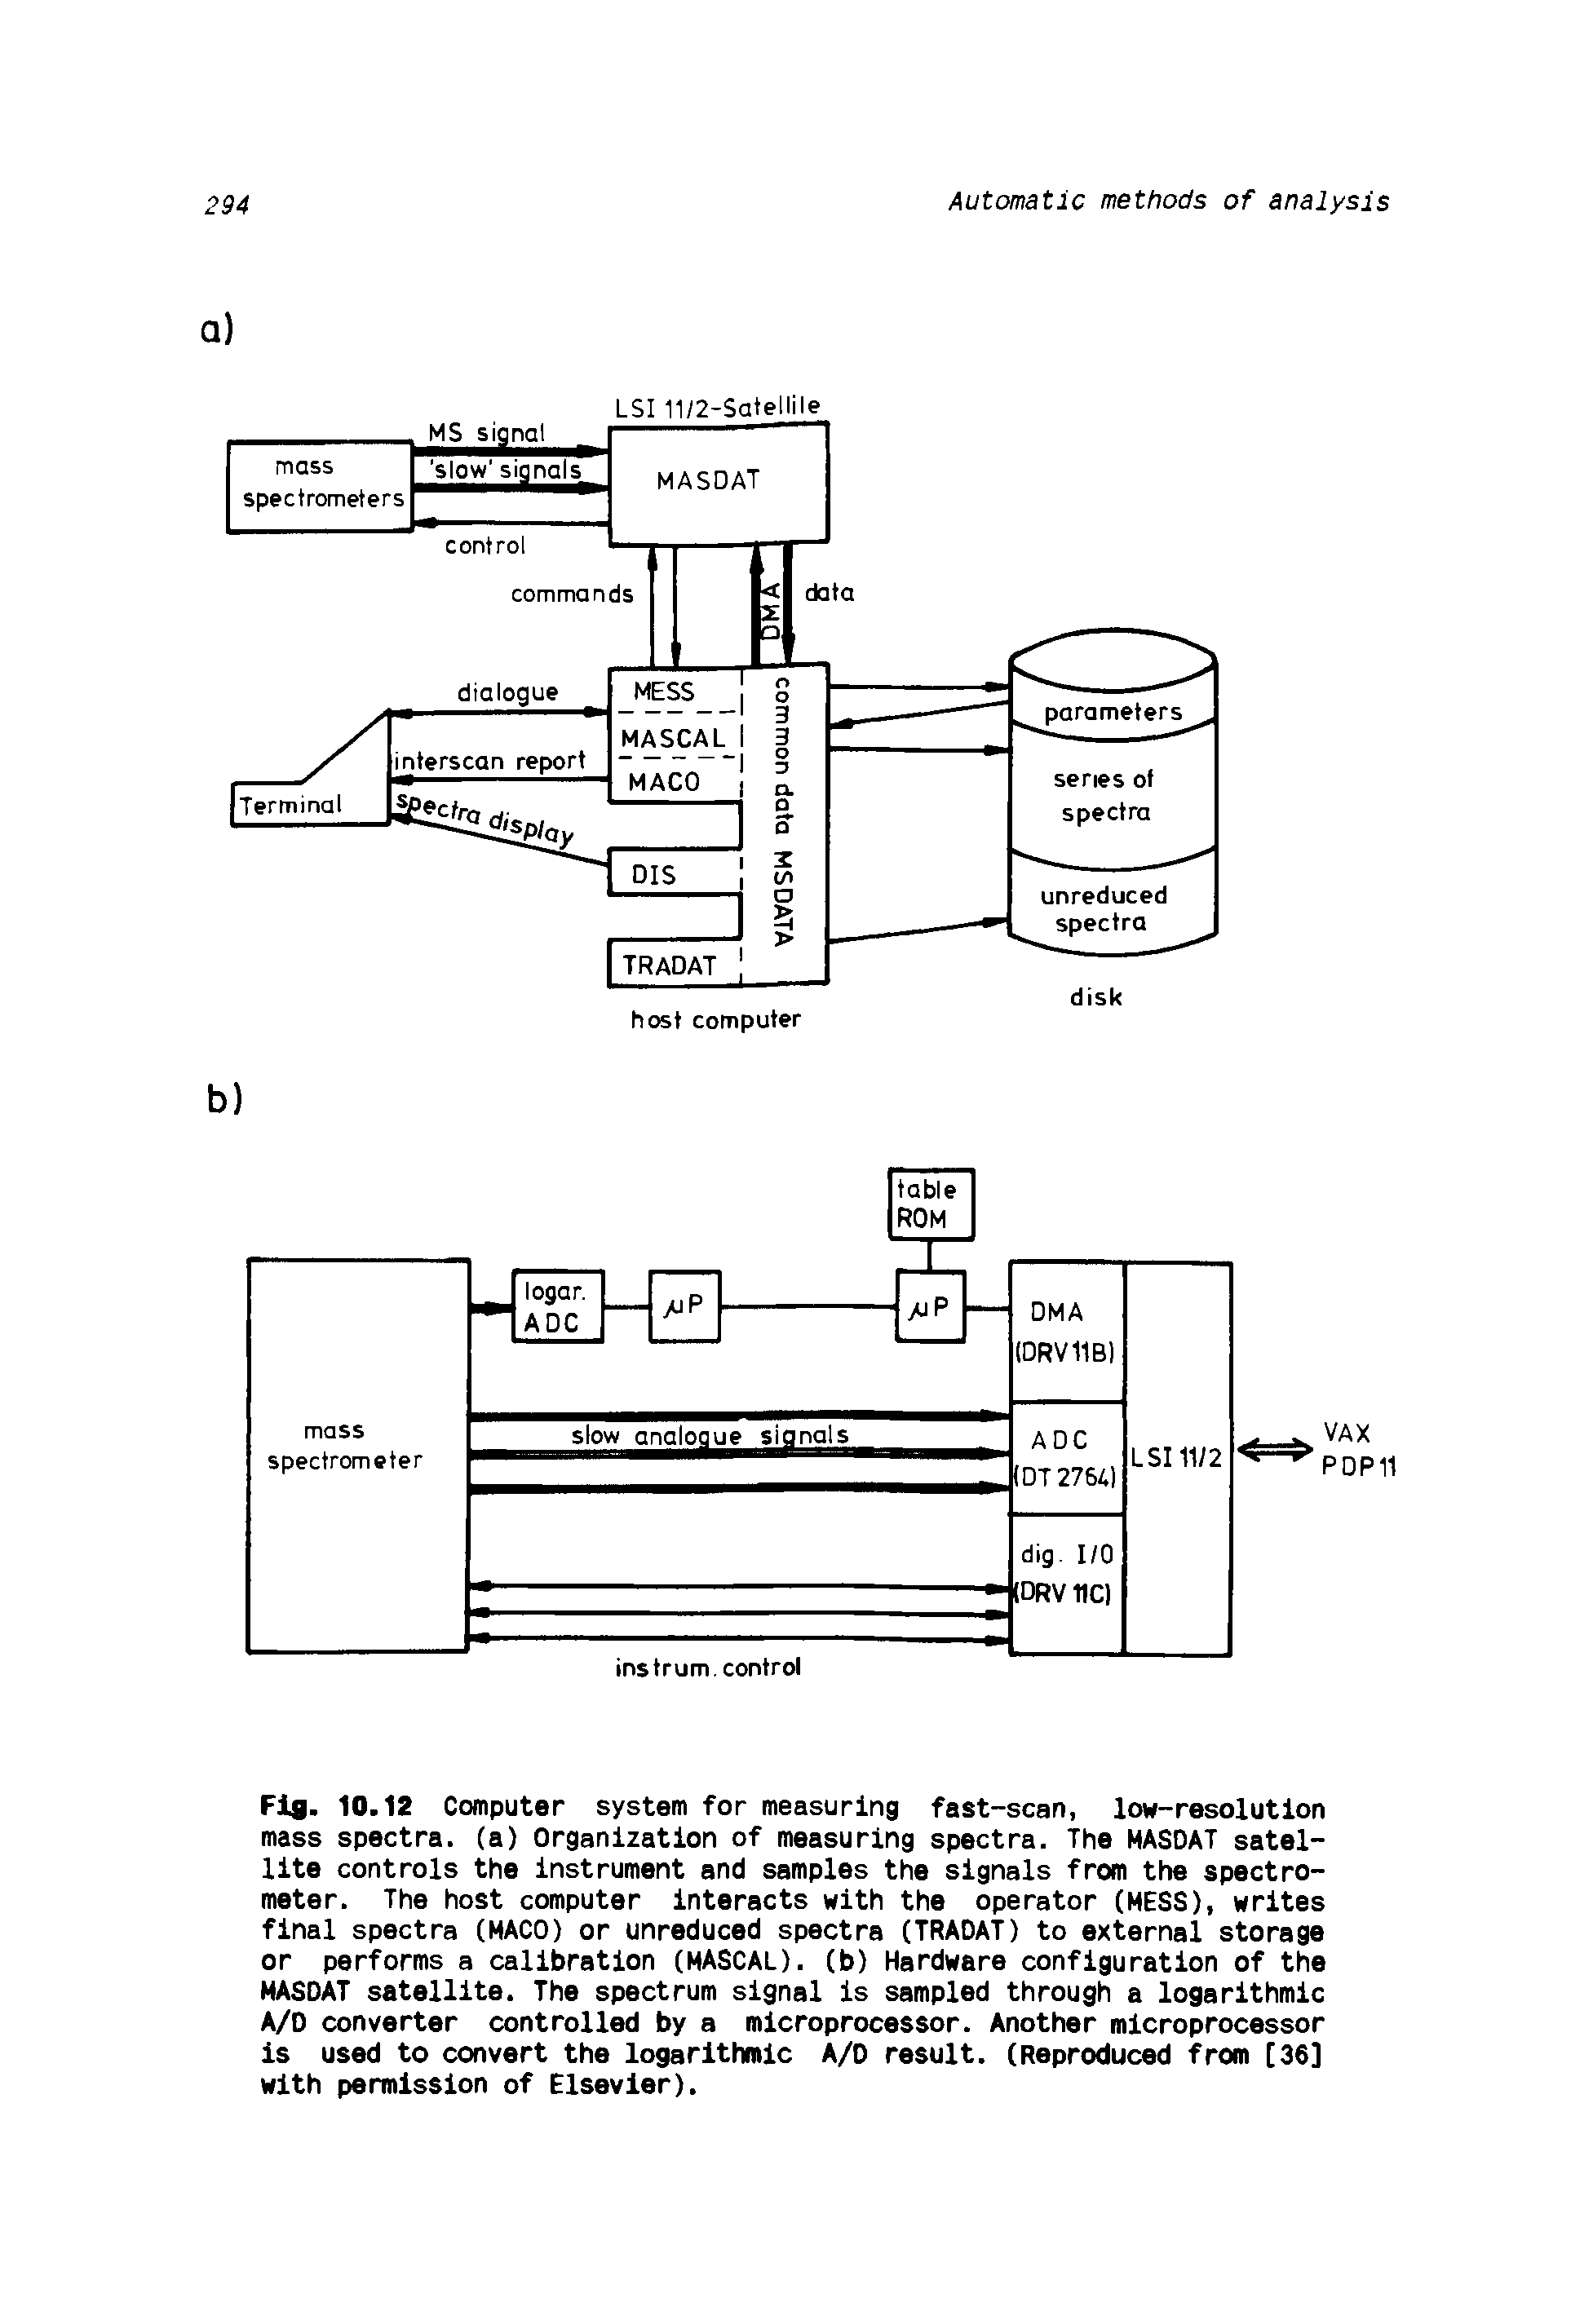 Fig. 10.12 Computer system for measuring fast-scan, low-resolution mass spectra, (a) Organization of measuring spectra. The MASDAT satellite controls the instrument and samples the signals from the spectrometer. The host computer interacts with the operator (MESS), writes final spectra (MACO) or unreduced spectra (TRADAT) to external storage or performs a calibration (MASCAL). (b) Hardware configuration of the MASDAT satellite. The spectrum signal is sampled through a logarithmic A/D converter controlled by a microprocessor. Another microprocessor is used to convert the logarithmic A/D result. (Reproduced from [36] with permission of Elsevier).